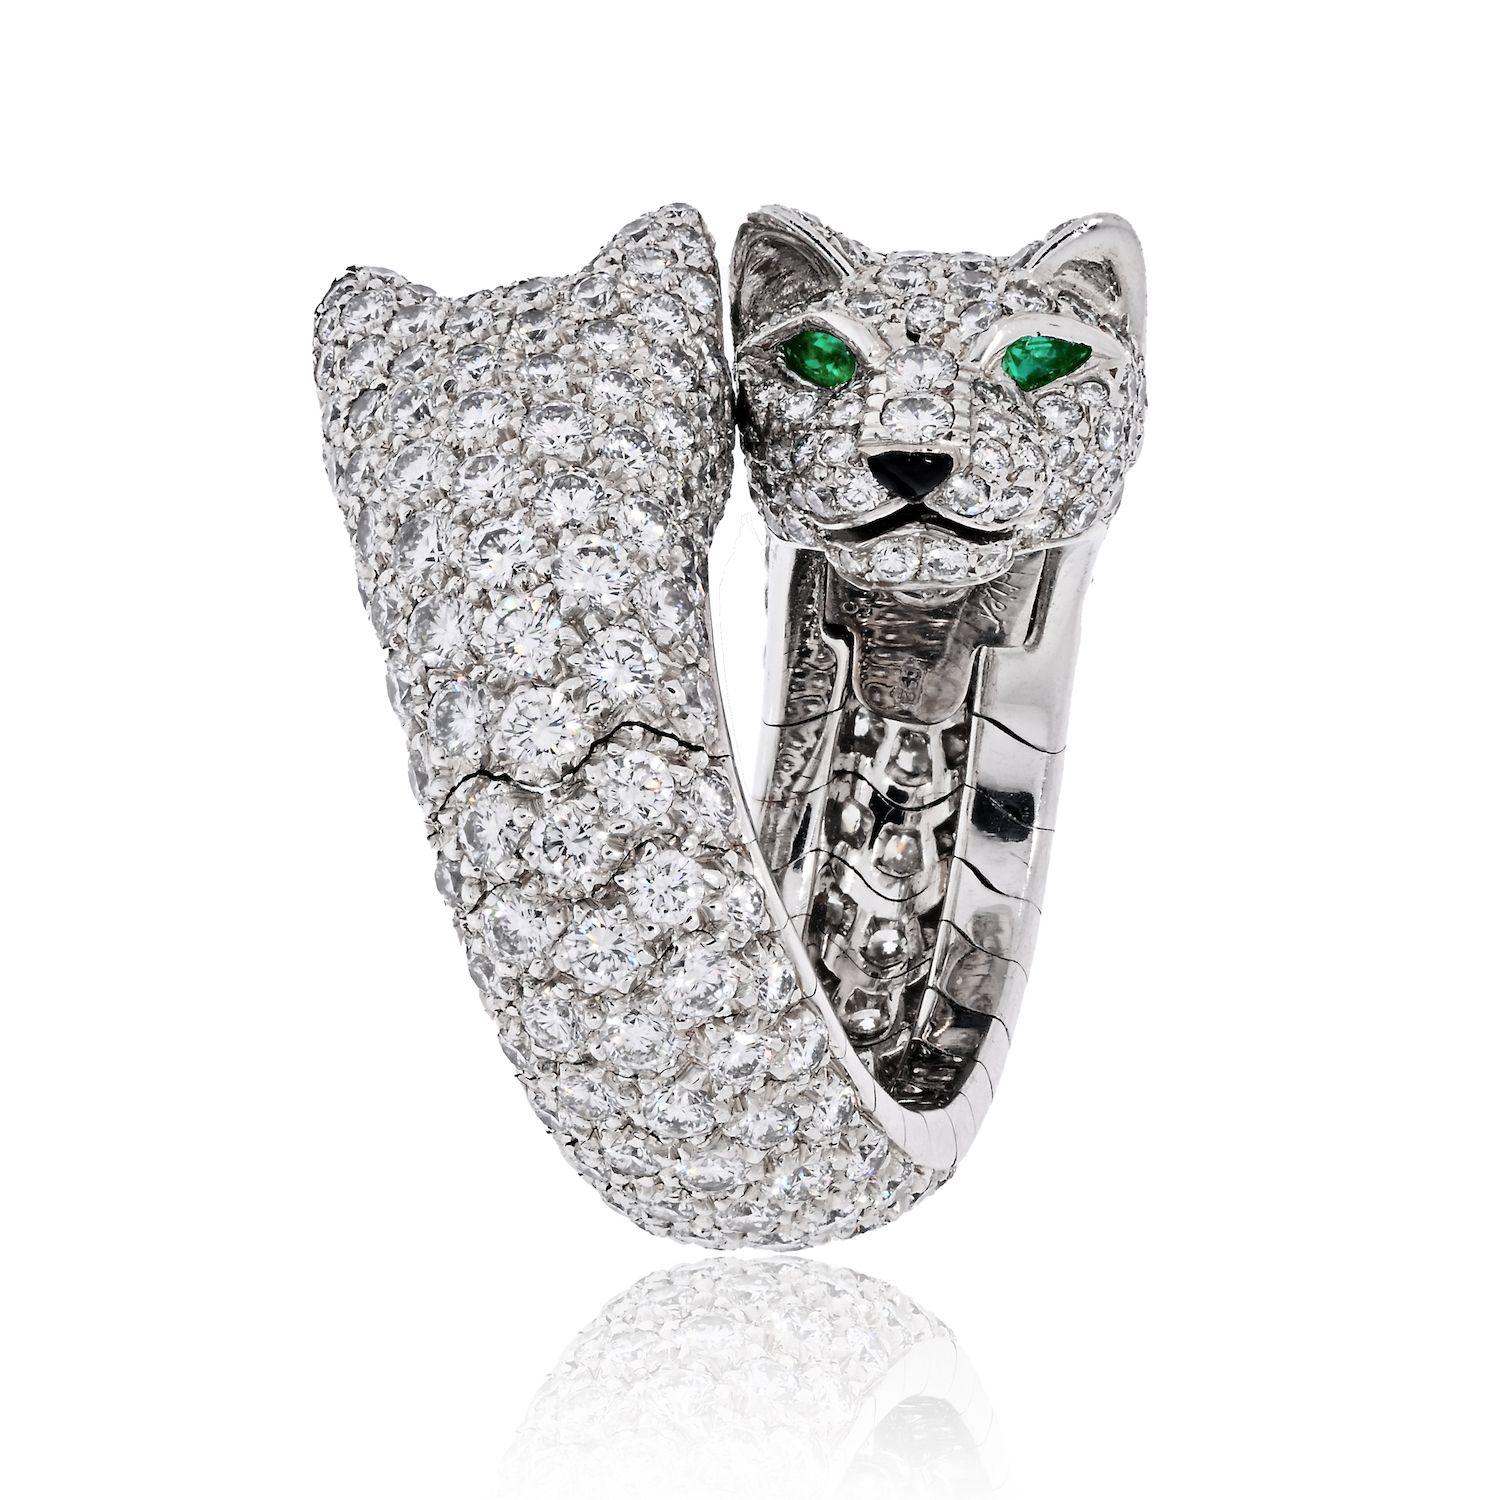 Cartier Panthere Ring, with double Lakarda diamond panthers facing each other. The Panthere de Cartier ring, made in 18K white gold, set with 356 brilliant-cut diamonds, totaling 5.04cts.
Eyes and nose: emeralds, onyx. 
Serial 9387**.
With a Cartier